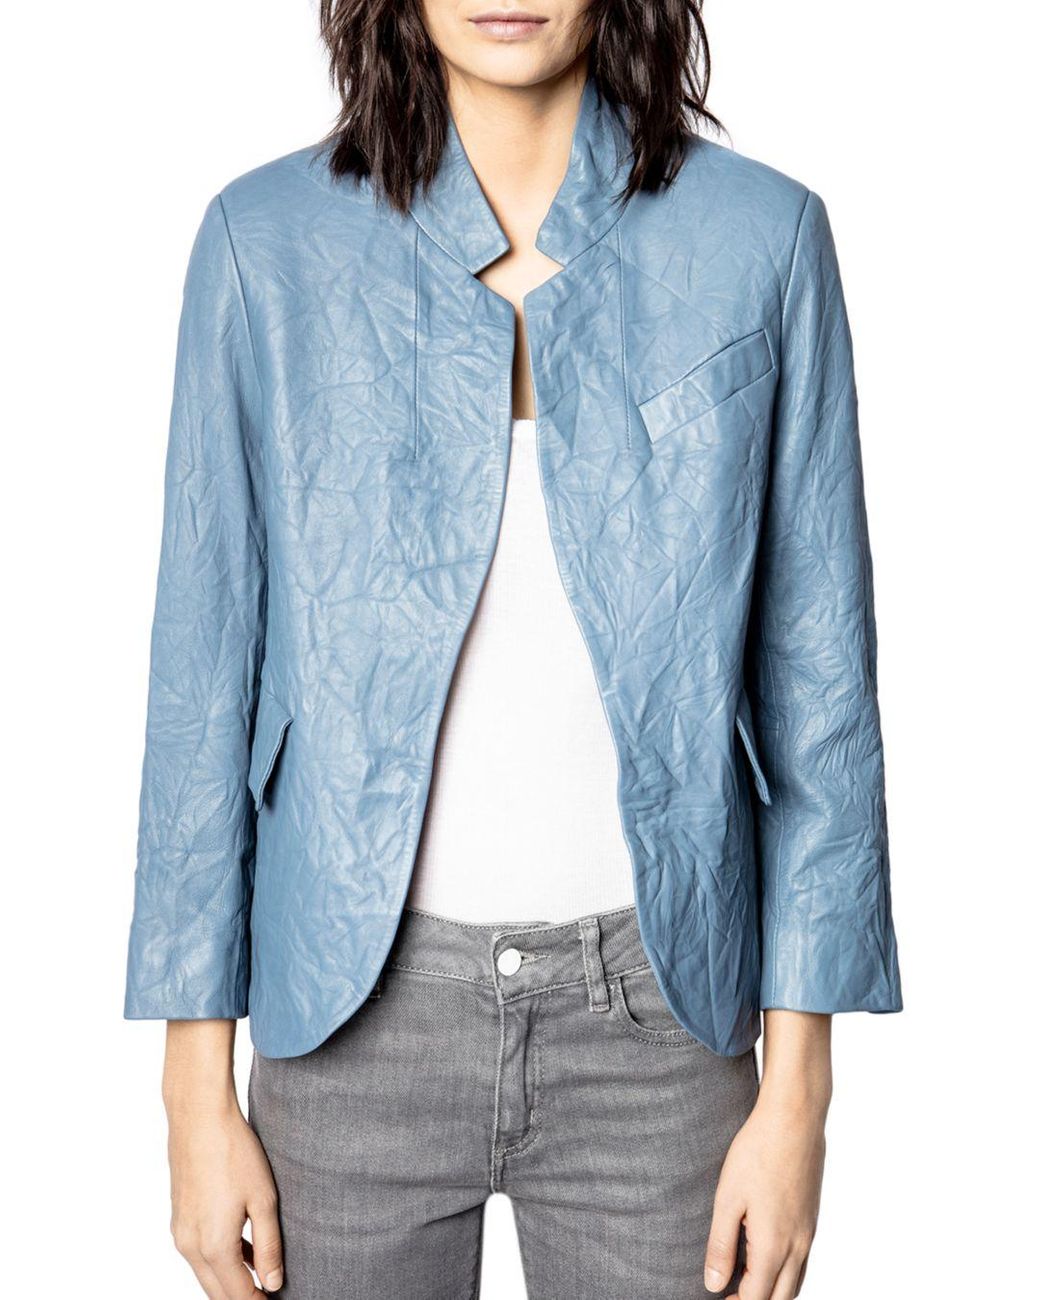 Zadig & Voltaire Verys Crinkled Leather Jacket in Blue - Lyst